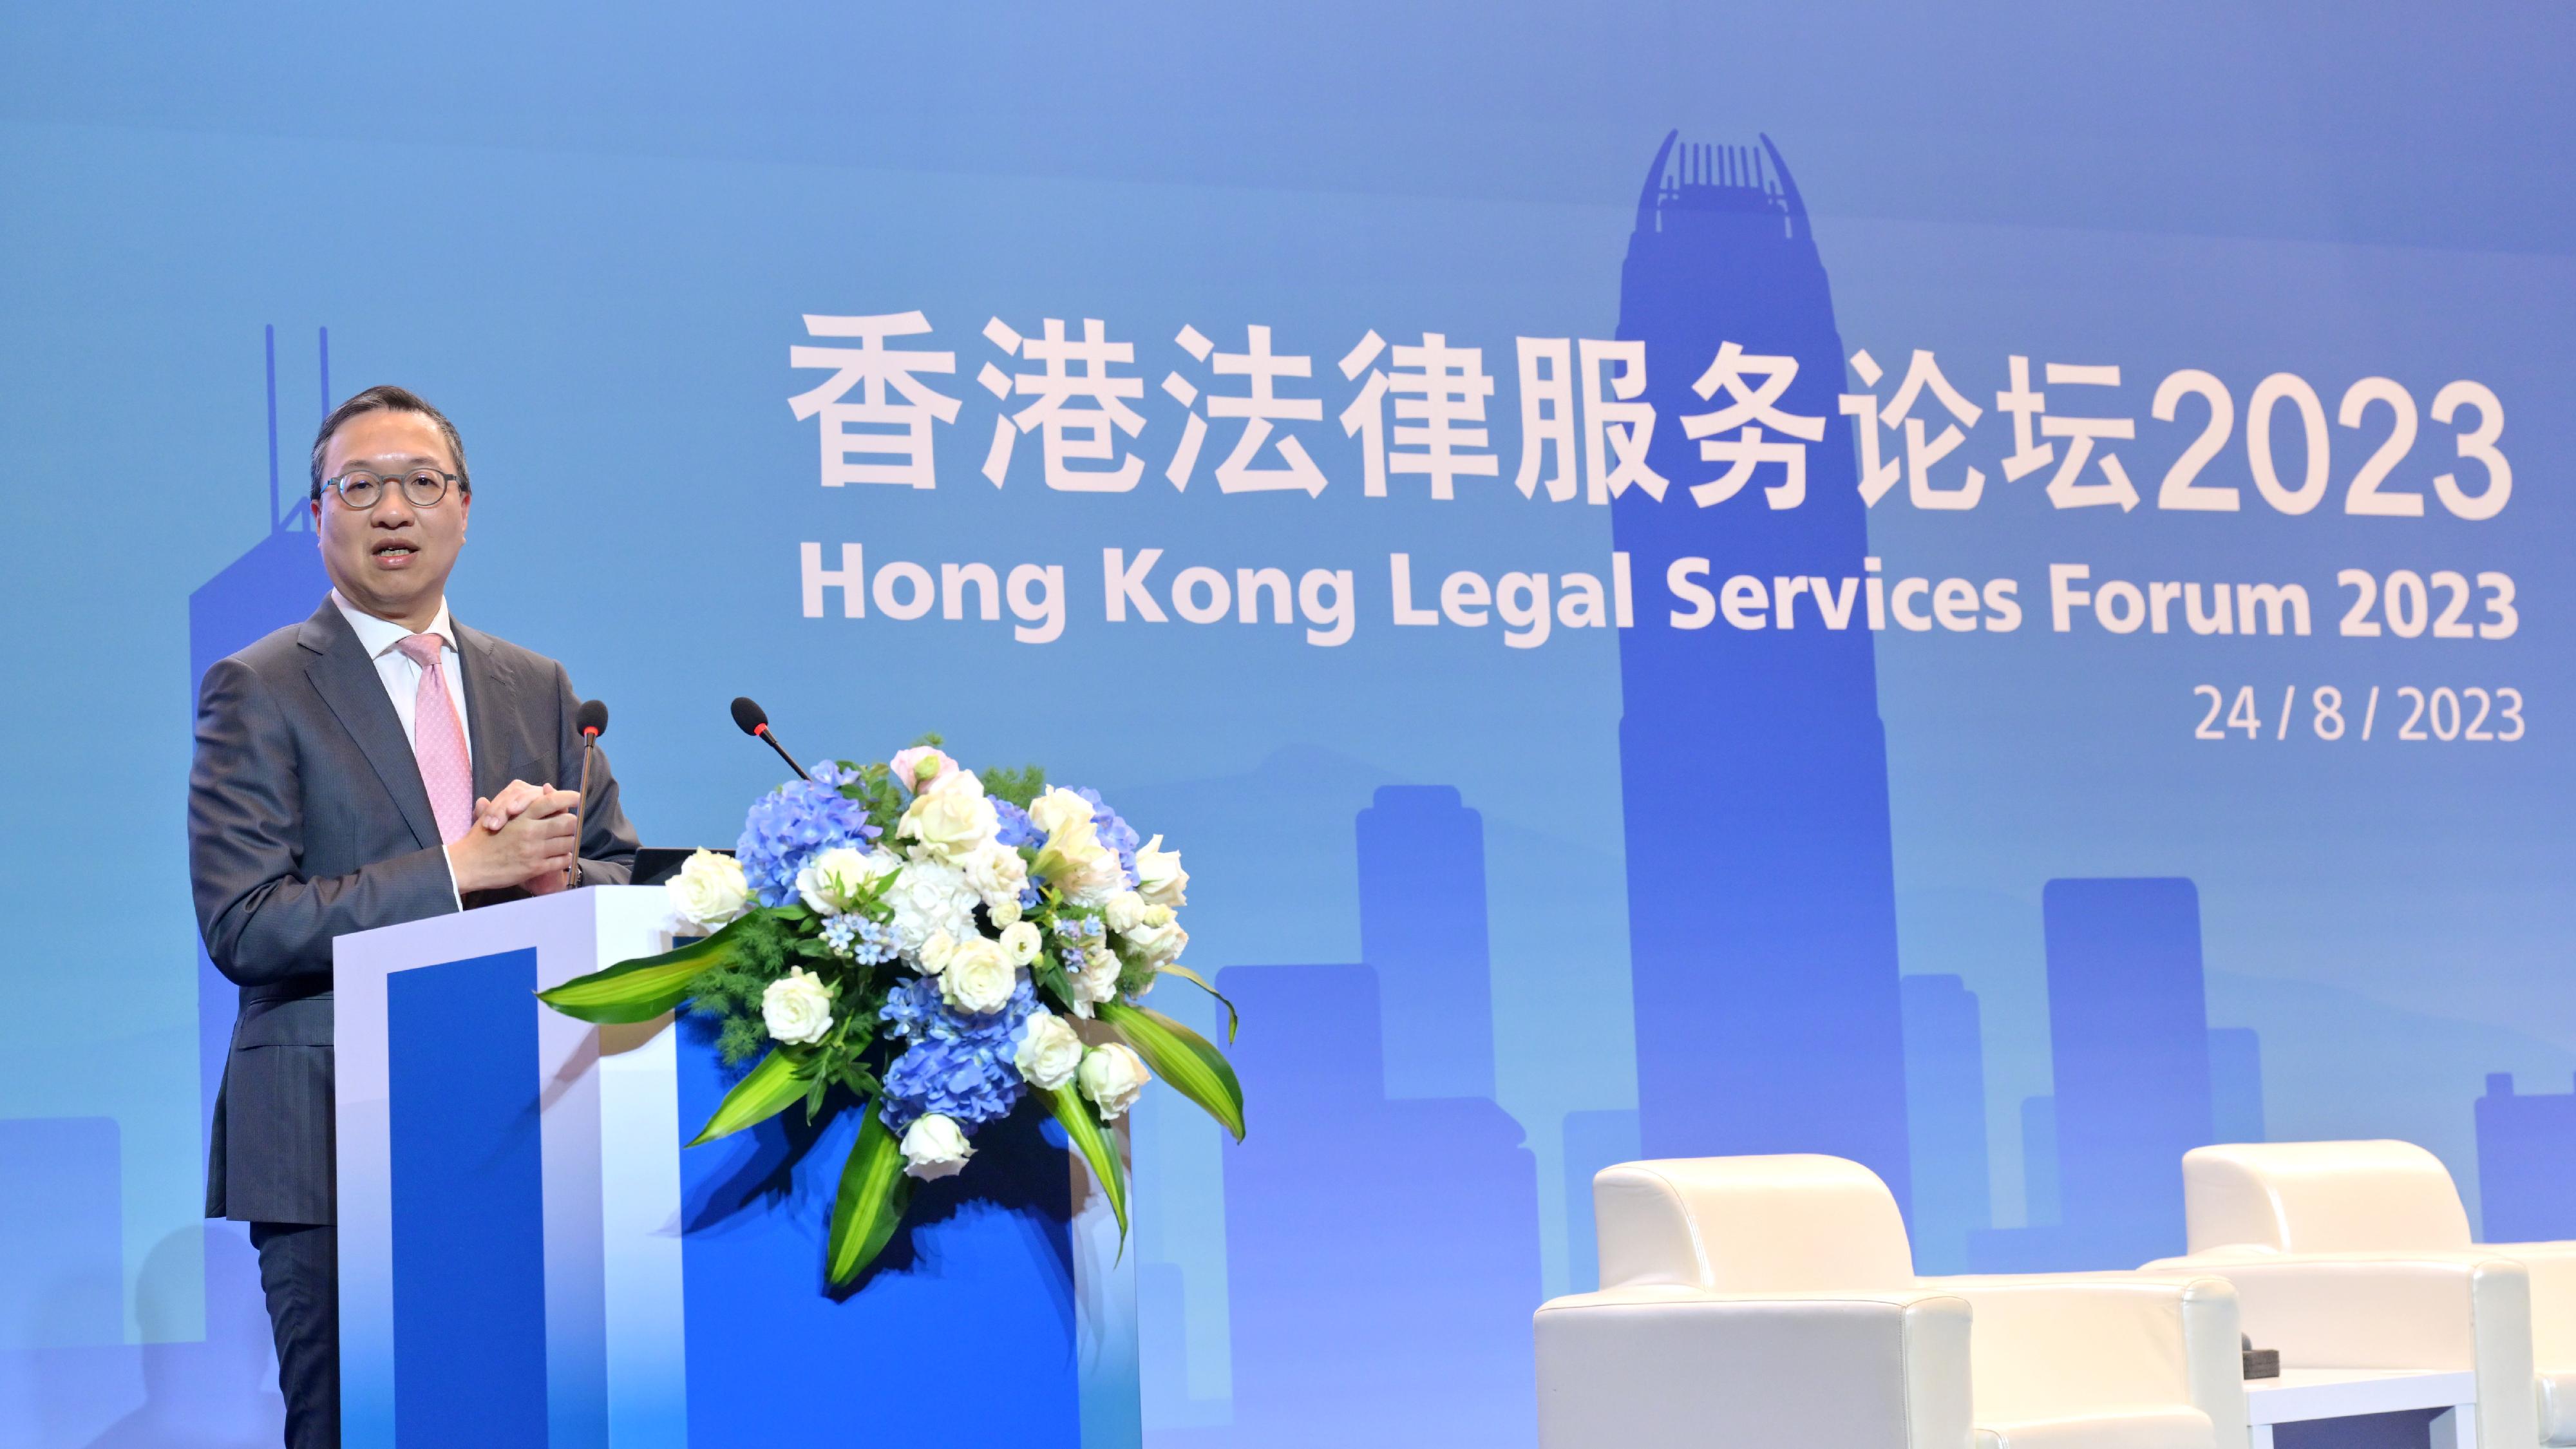 The Secretary for Justice, Mr Paul Lam, SC, led a Hong Kong legal and dispute resolution sector delegation to attend the sixth Hong Kong Legal Services Forum organised by the Department of Justice and co-organised by the Hong Kong Trade Development Council today (August 24) in Chengdu. Photo shows Mr Lam delivering his opening address.
